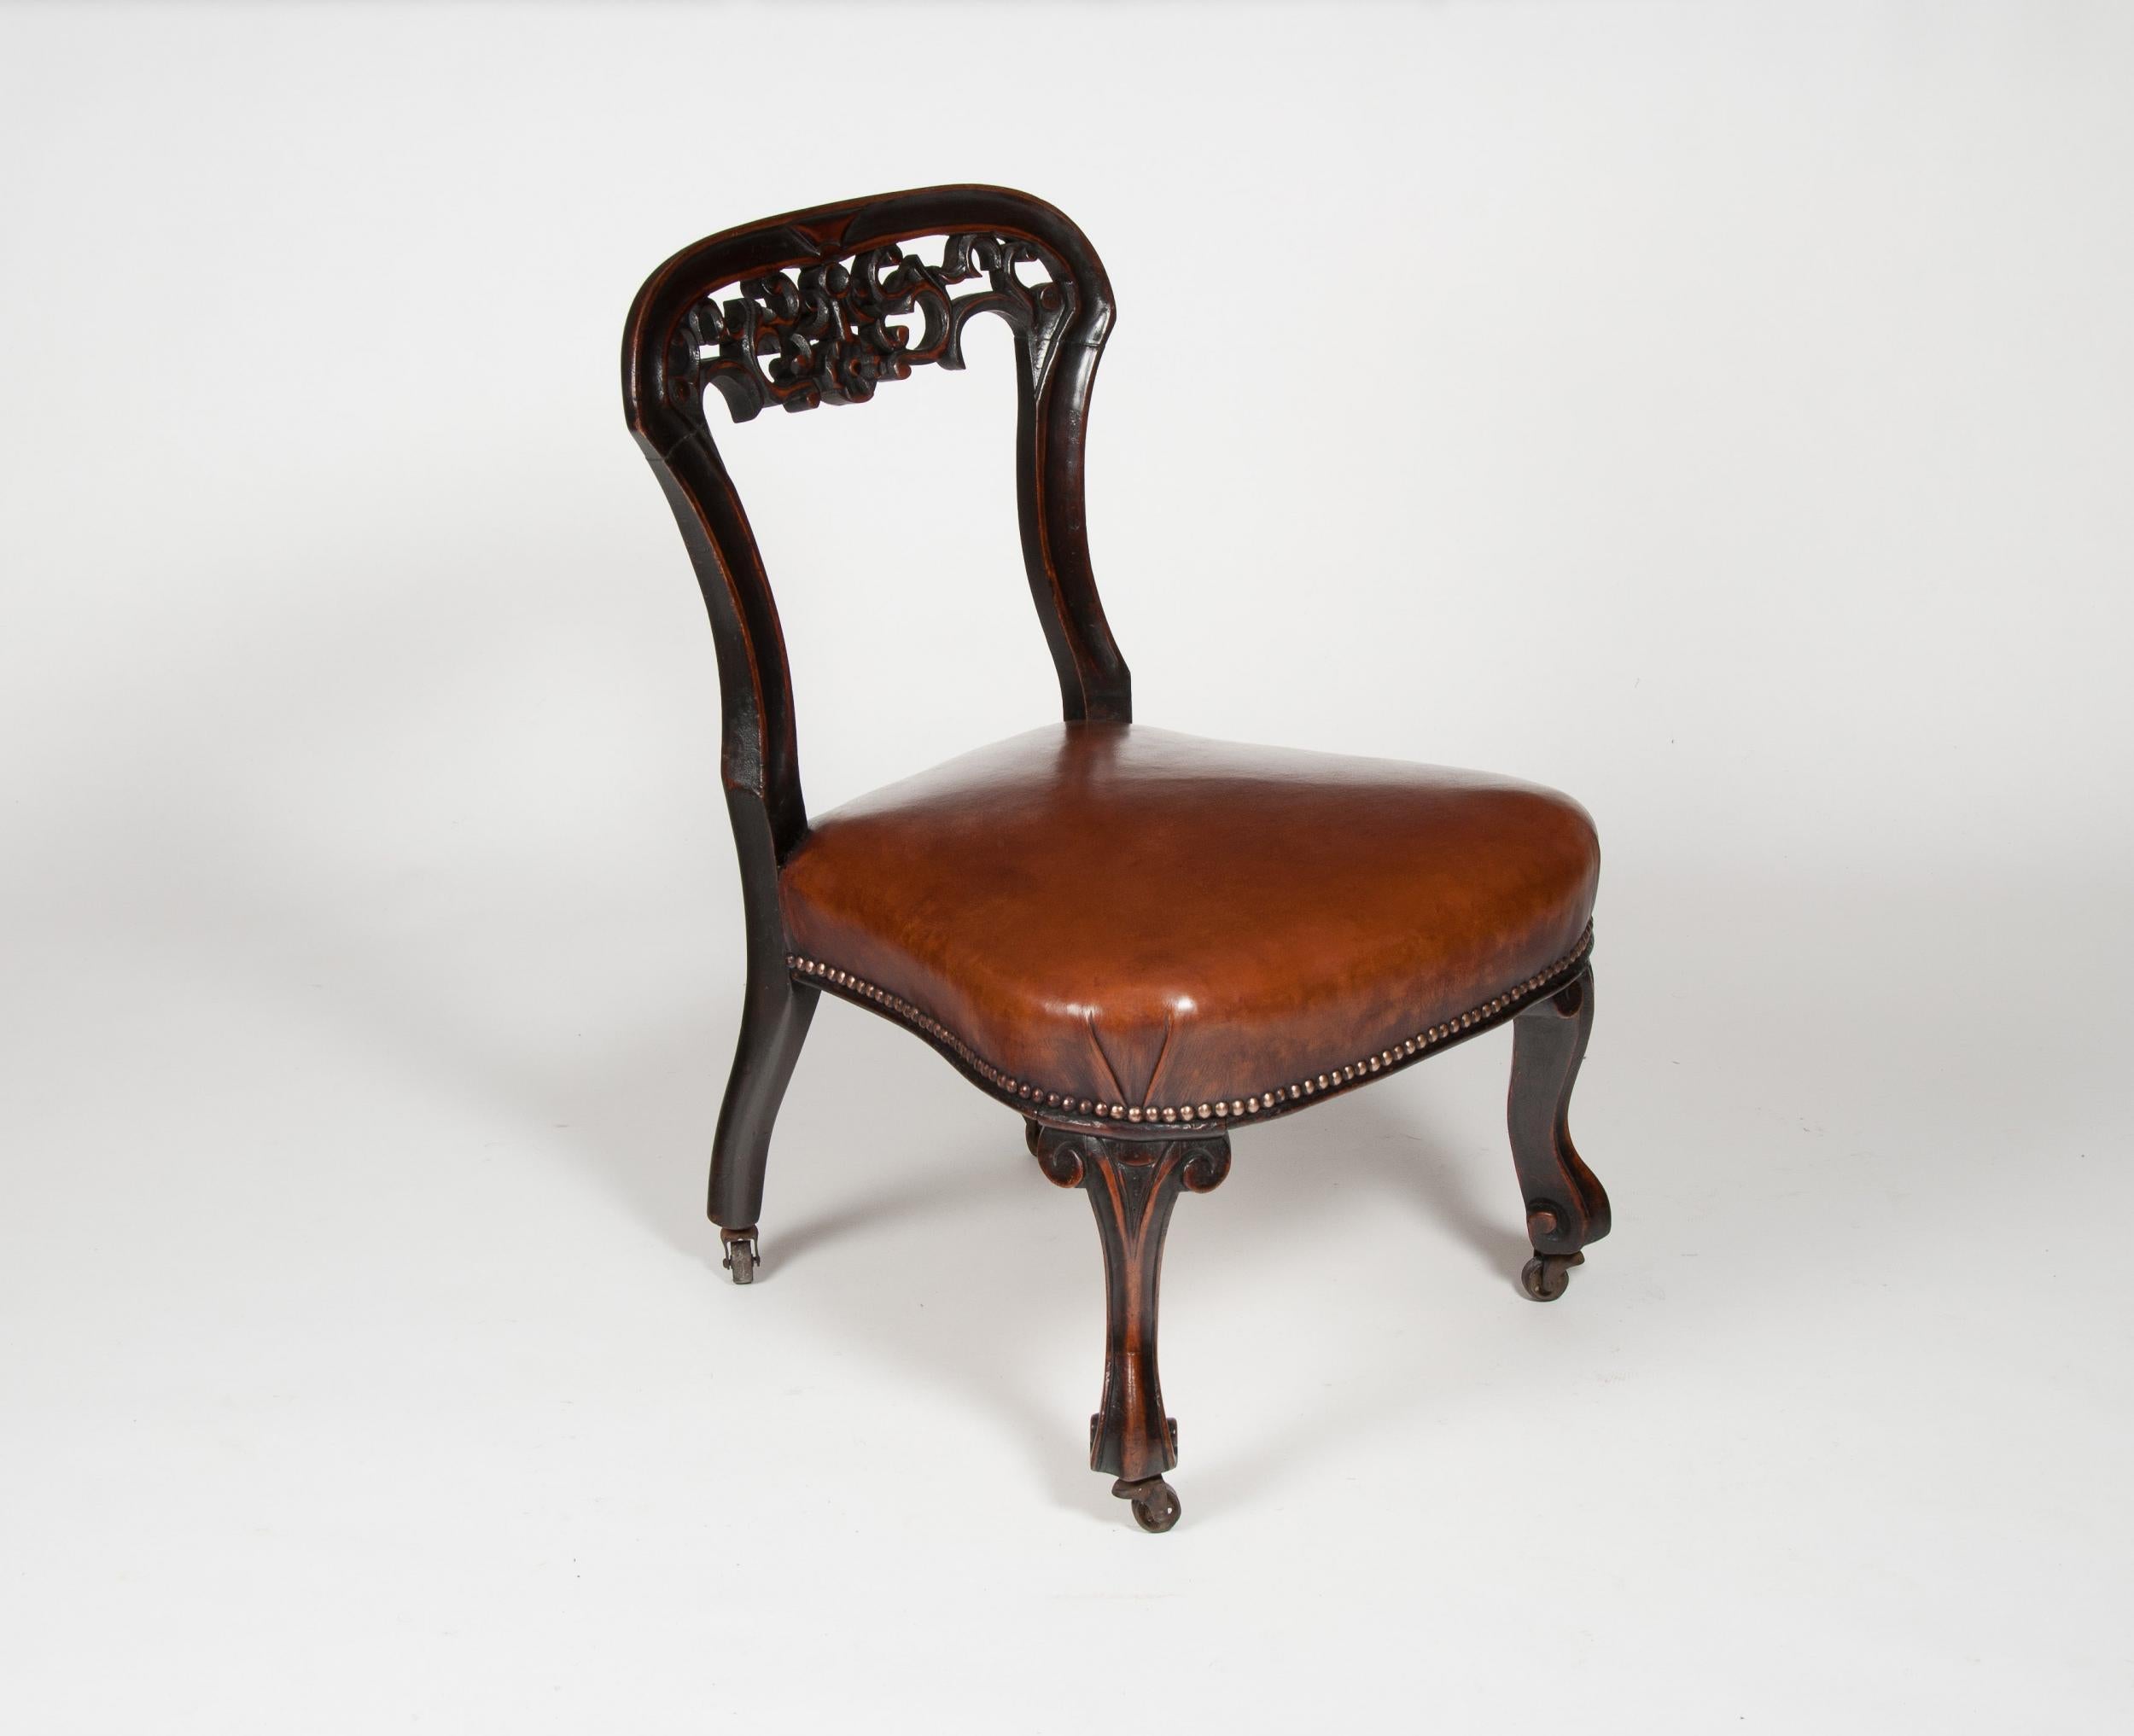 19th Century Rare Victorian Mahogany Leather Upholstered Childs Chair For Sale